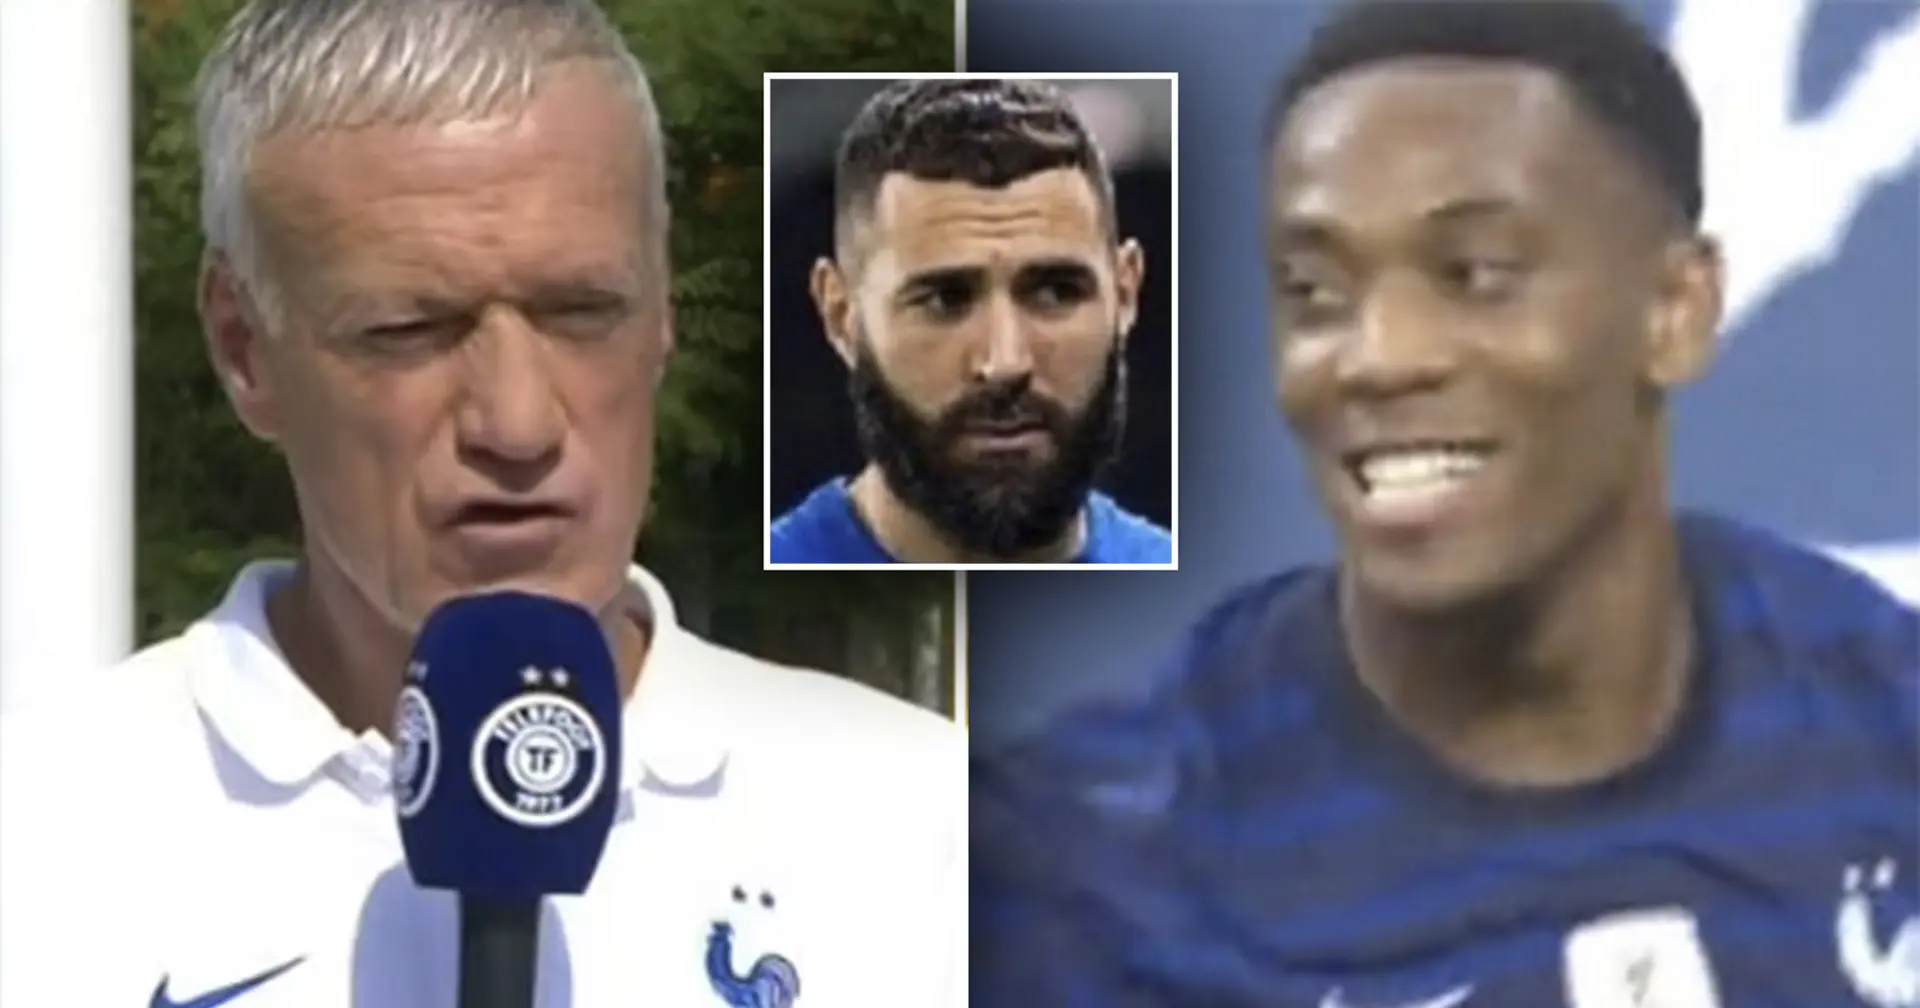 Deschamps makes decision on whether to replace injured Benzema with Martial